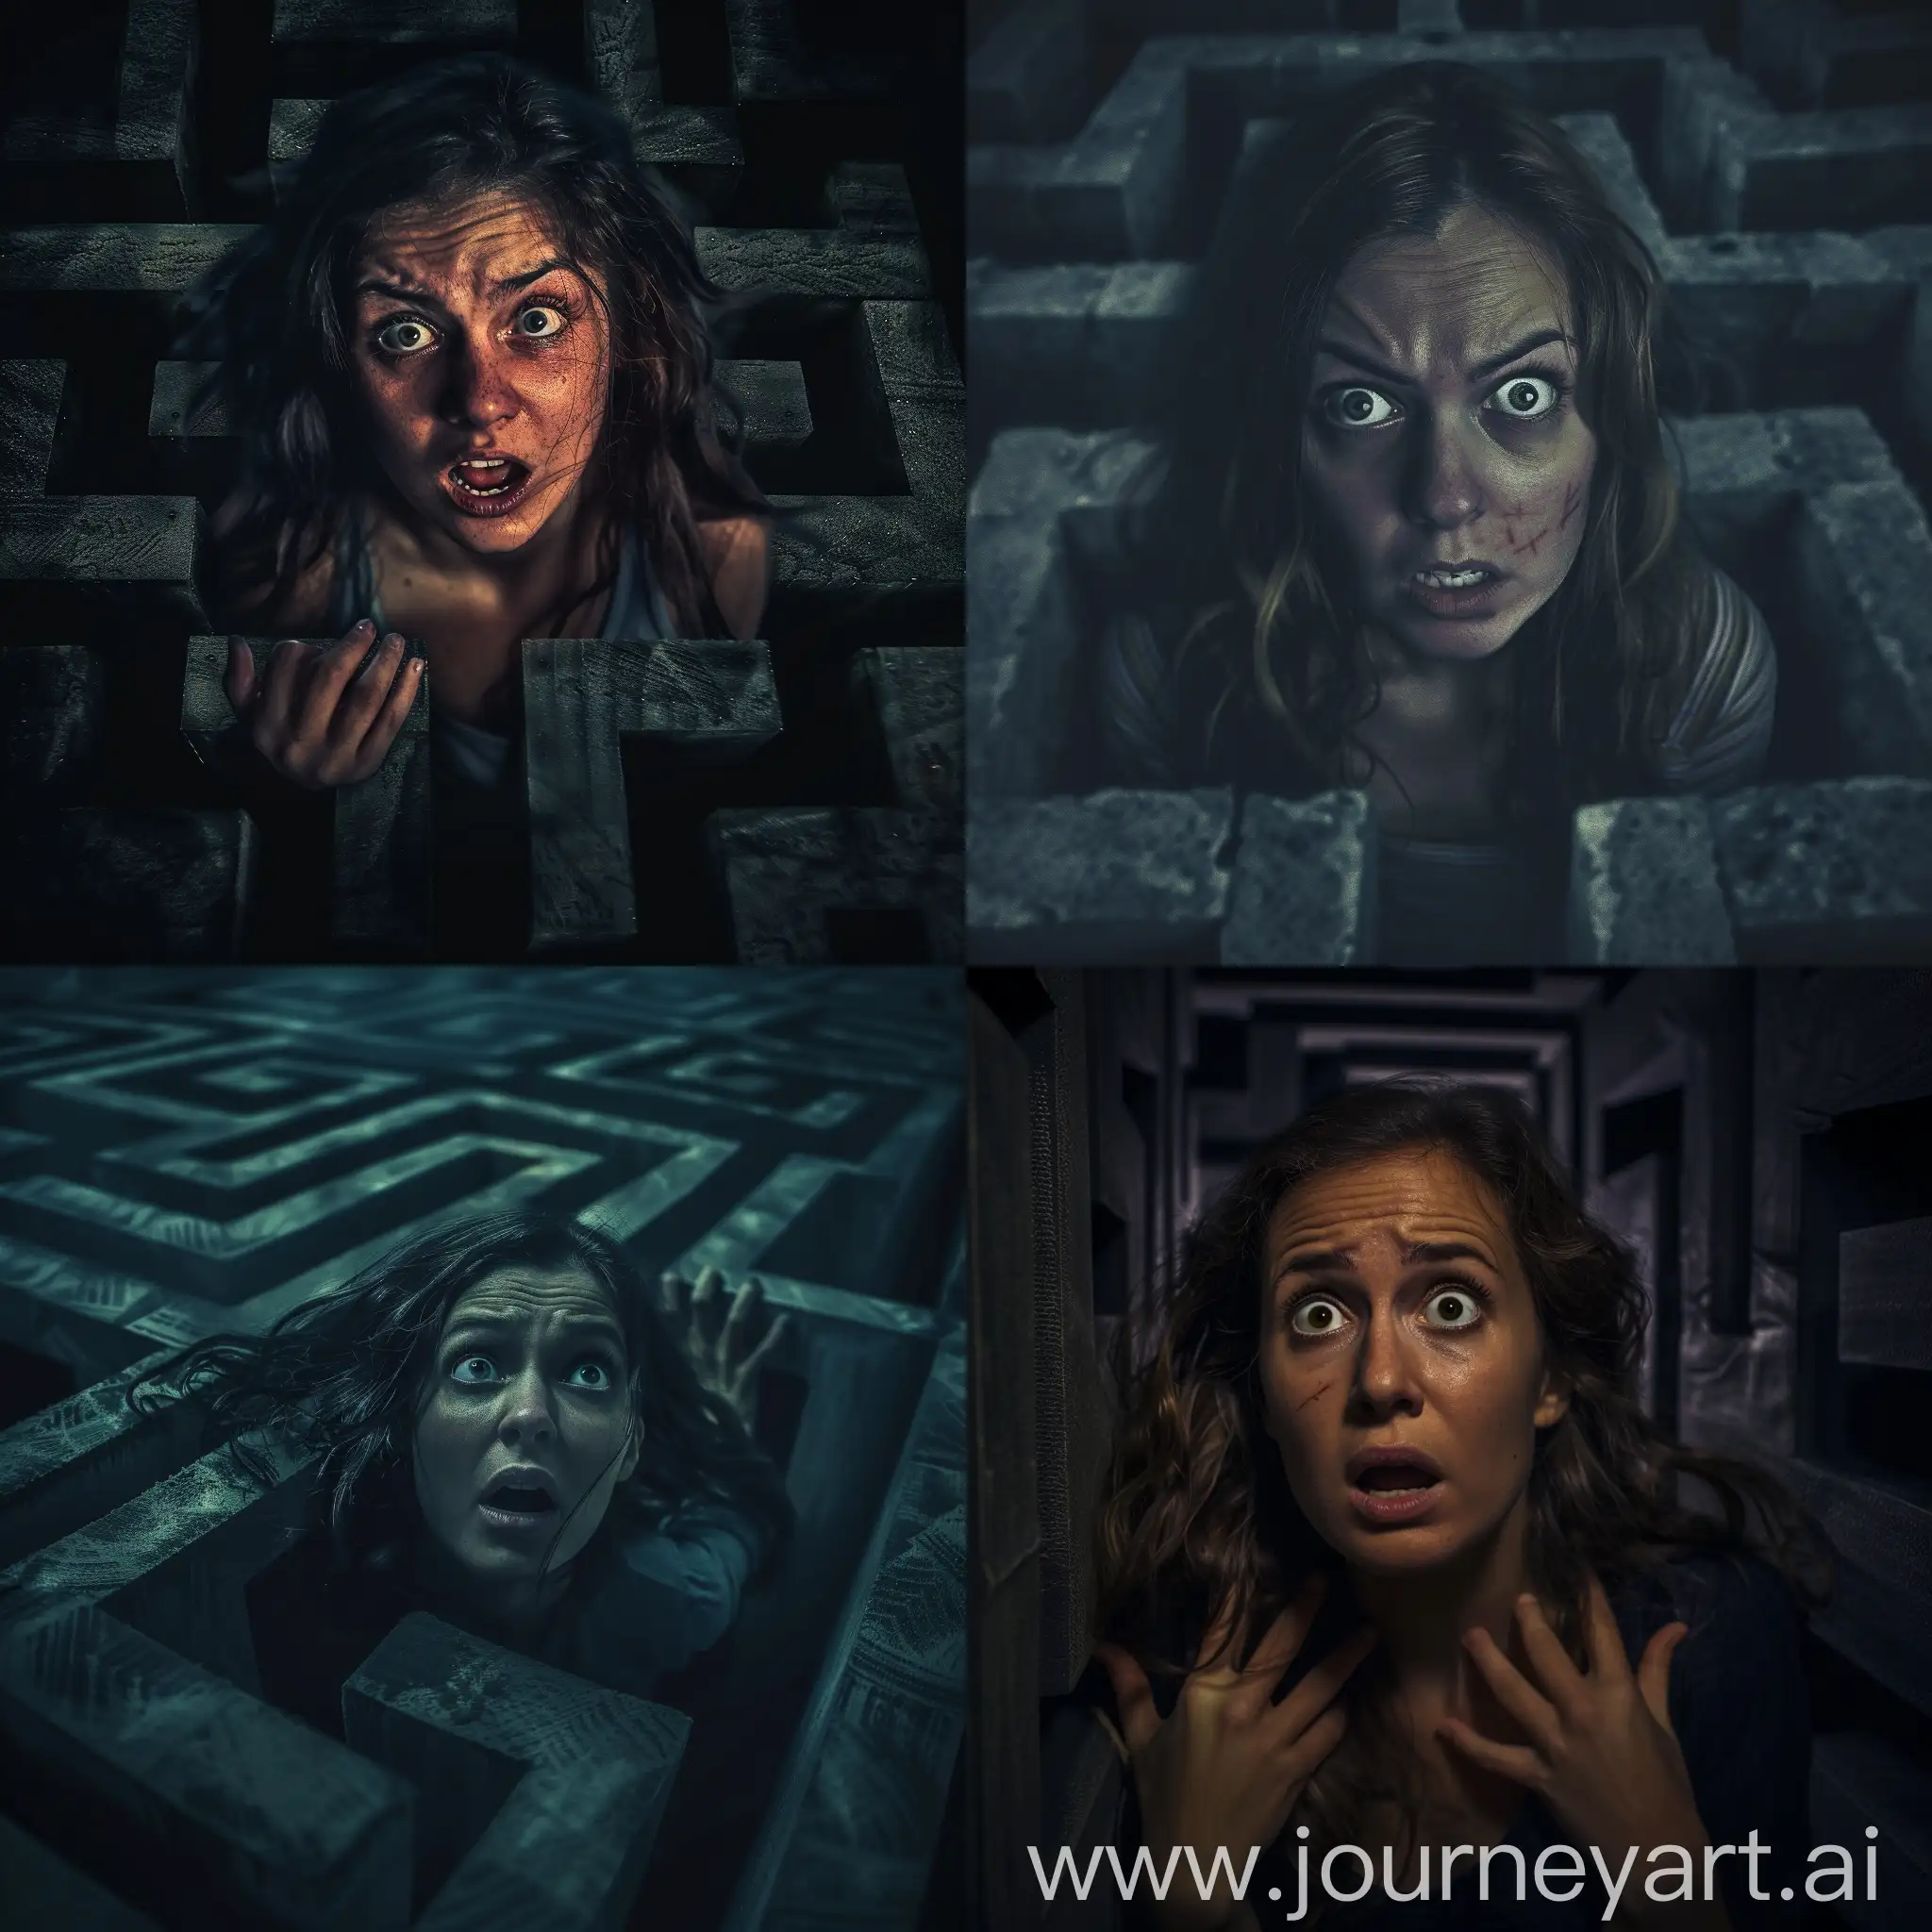 Woman-with-a-scared-and-frightened-face-in-a-dark-maze